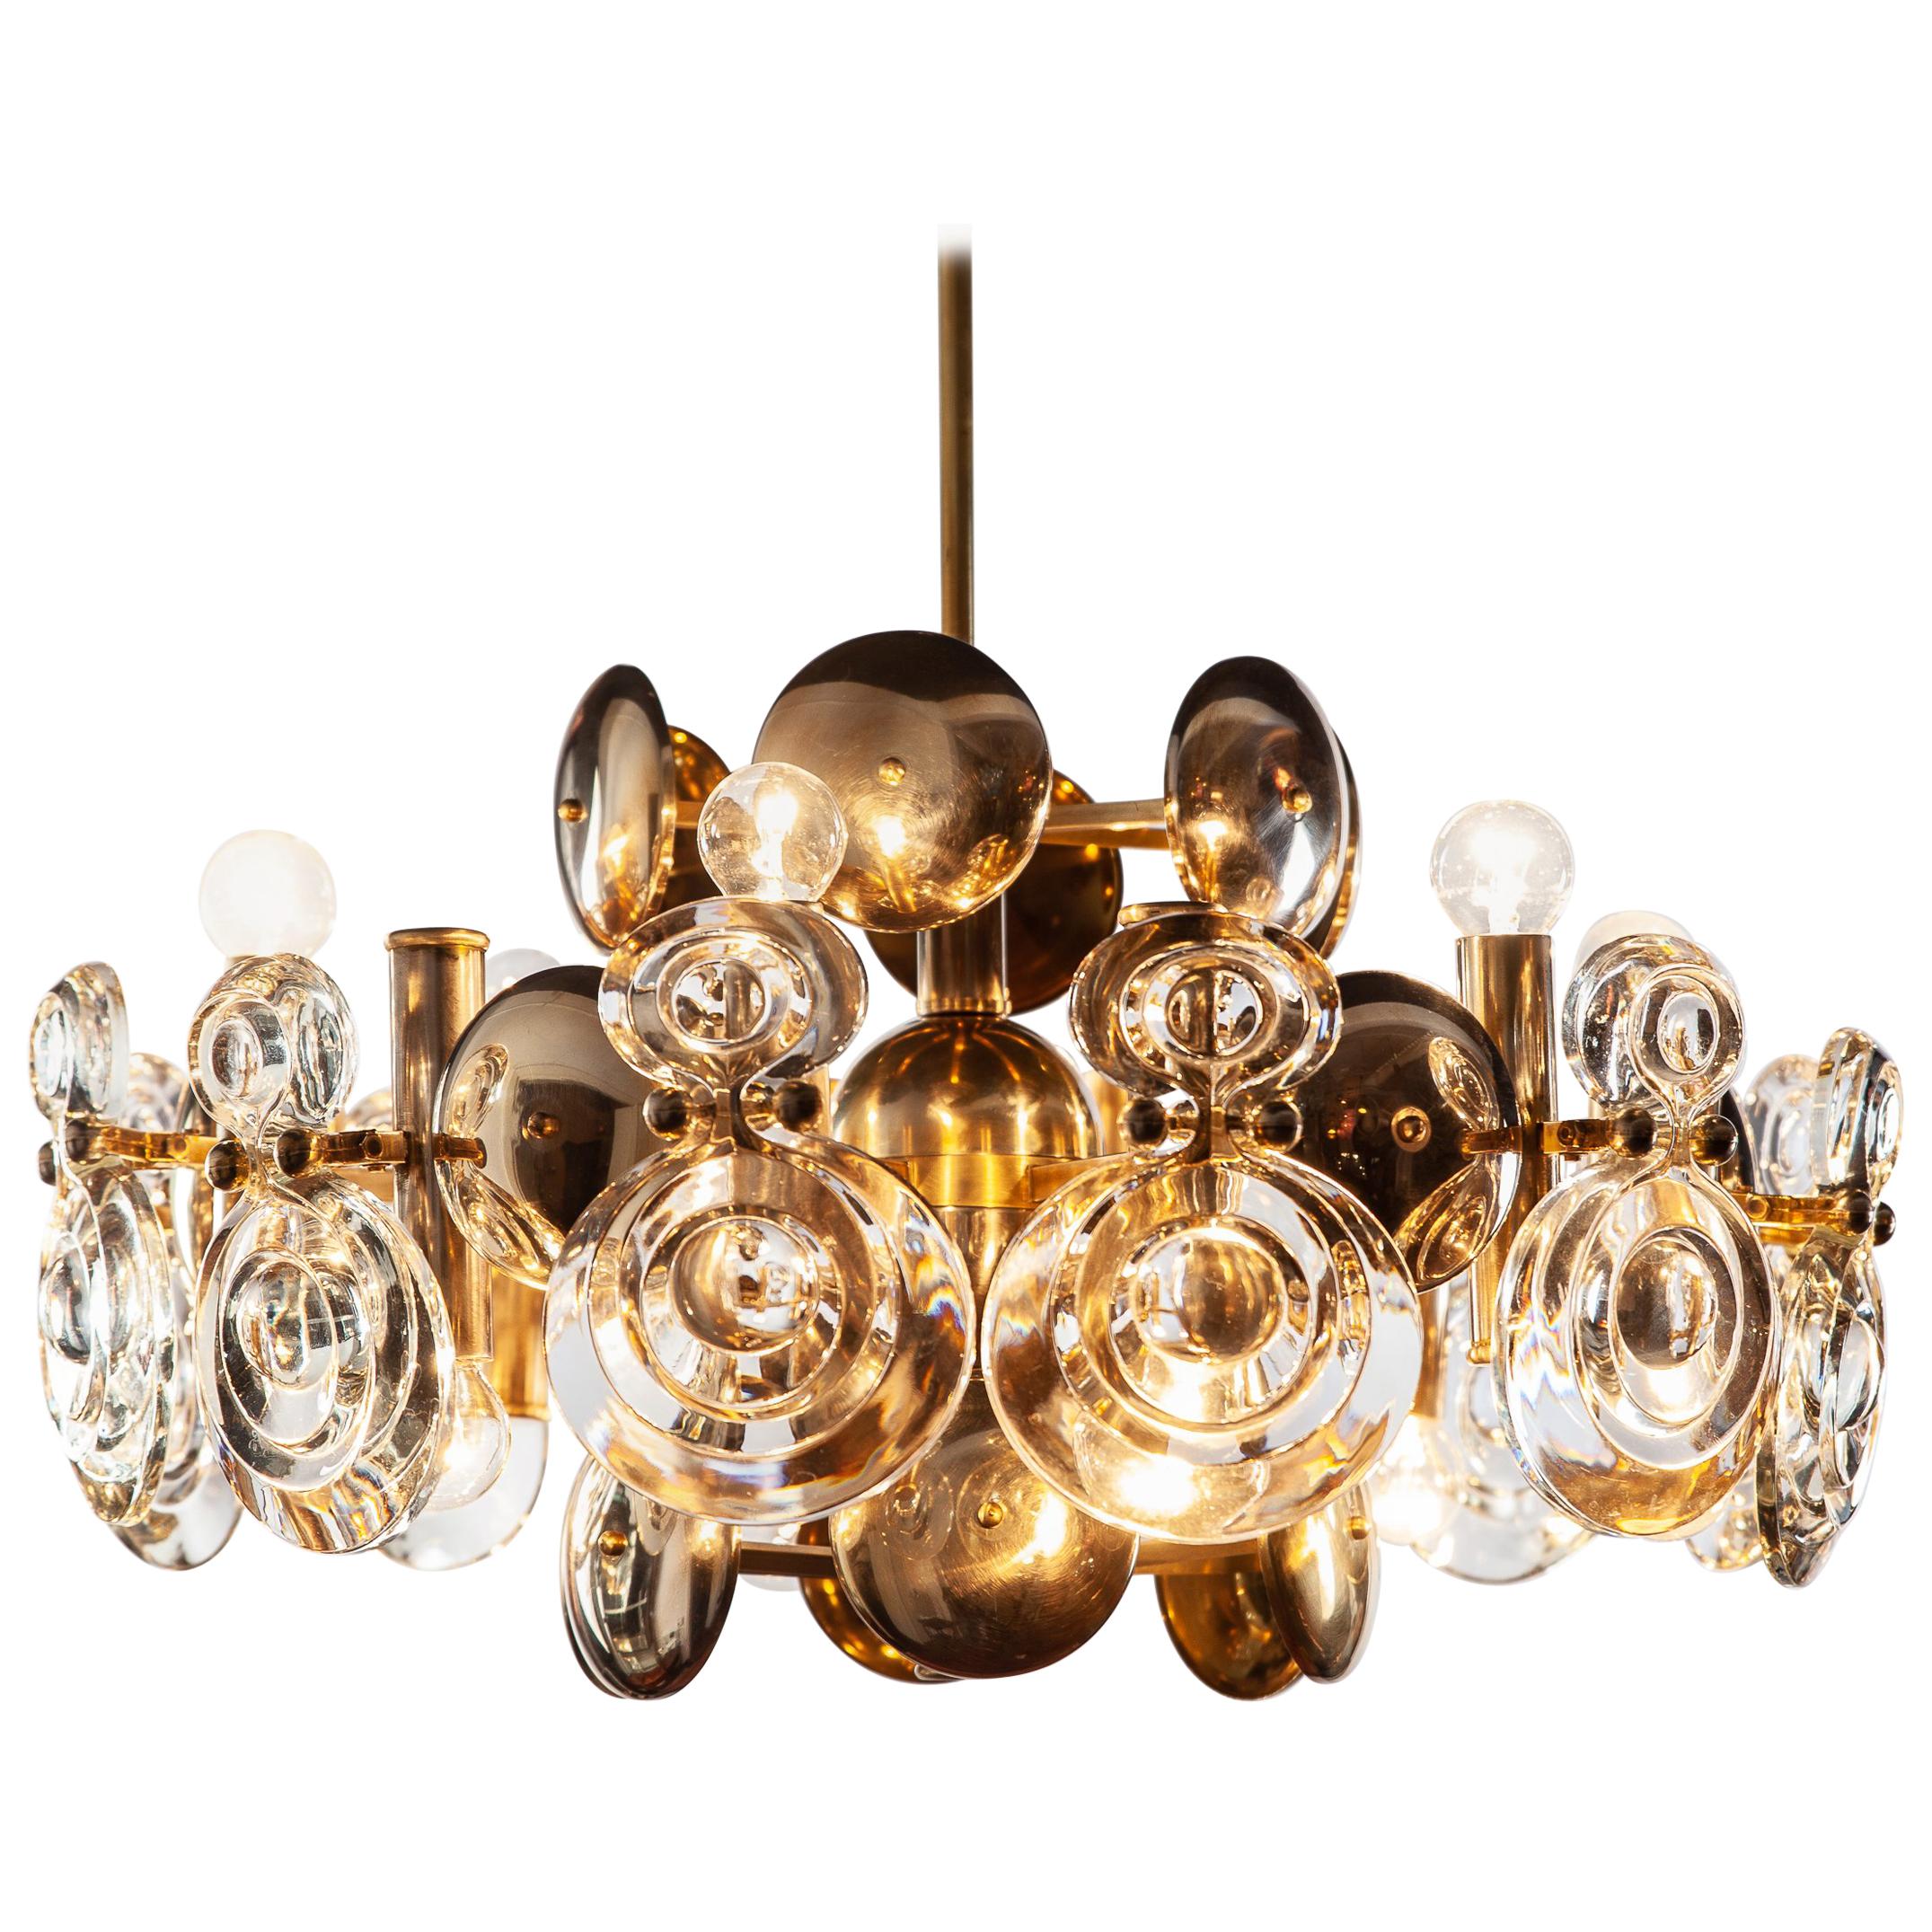 Italian, large midcentury Gaetano Sciolari two-tier chandelier featuring in the original brass finish. Fine optic glass lenses are decoratively and functionally mounted on unusually shaped concave metal shields to serve as reflectors. Top tier holds